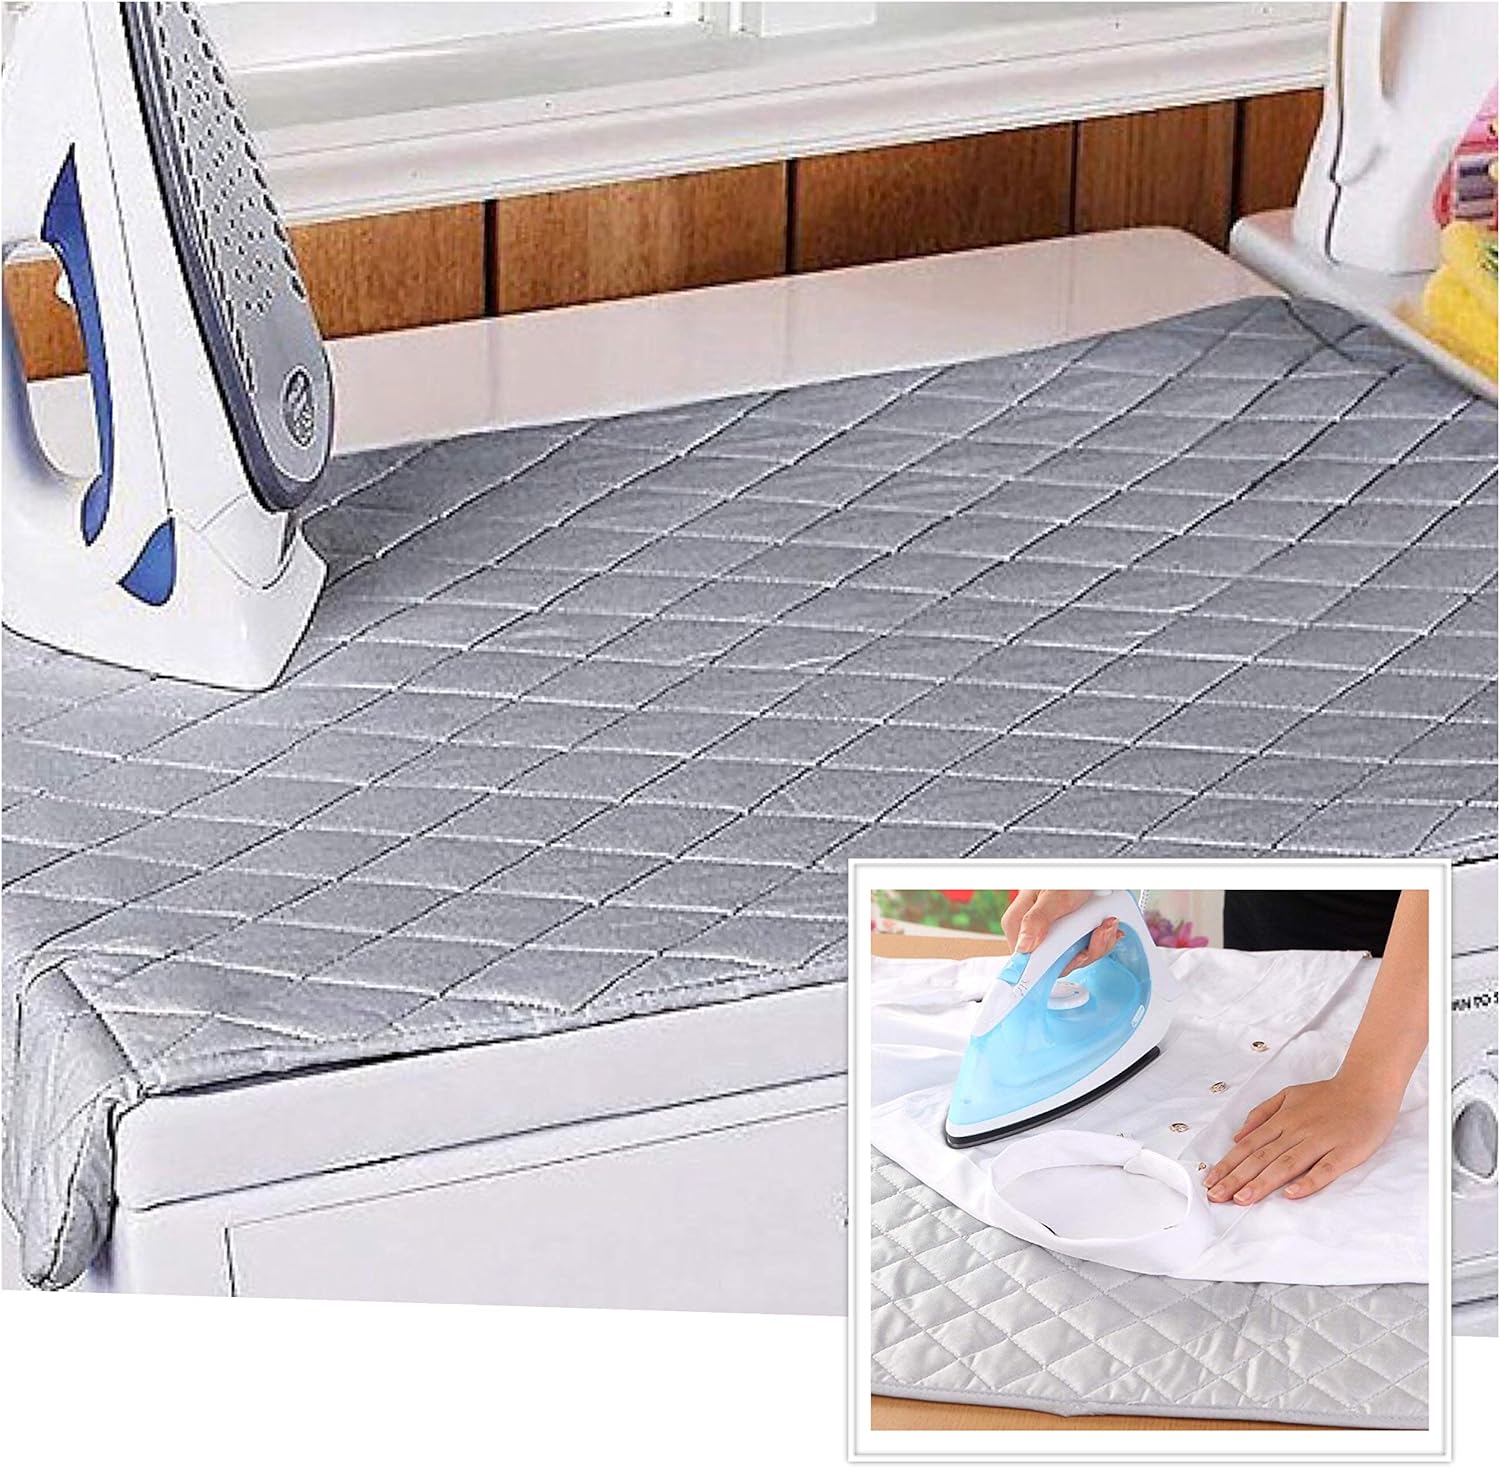 ADEPTNA Durable Anywhere Ironing Pad Mat Travel Ironing Blanket Cotton Ironing Mat Special Titanium Coating Reflects the Heat-No More Bulky Ironing Boards-Perfect for traveling or Small Apartments